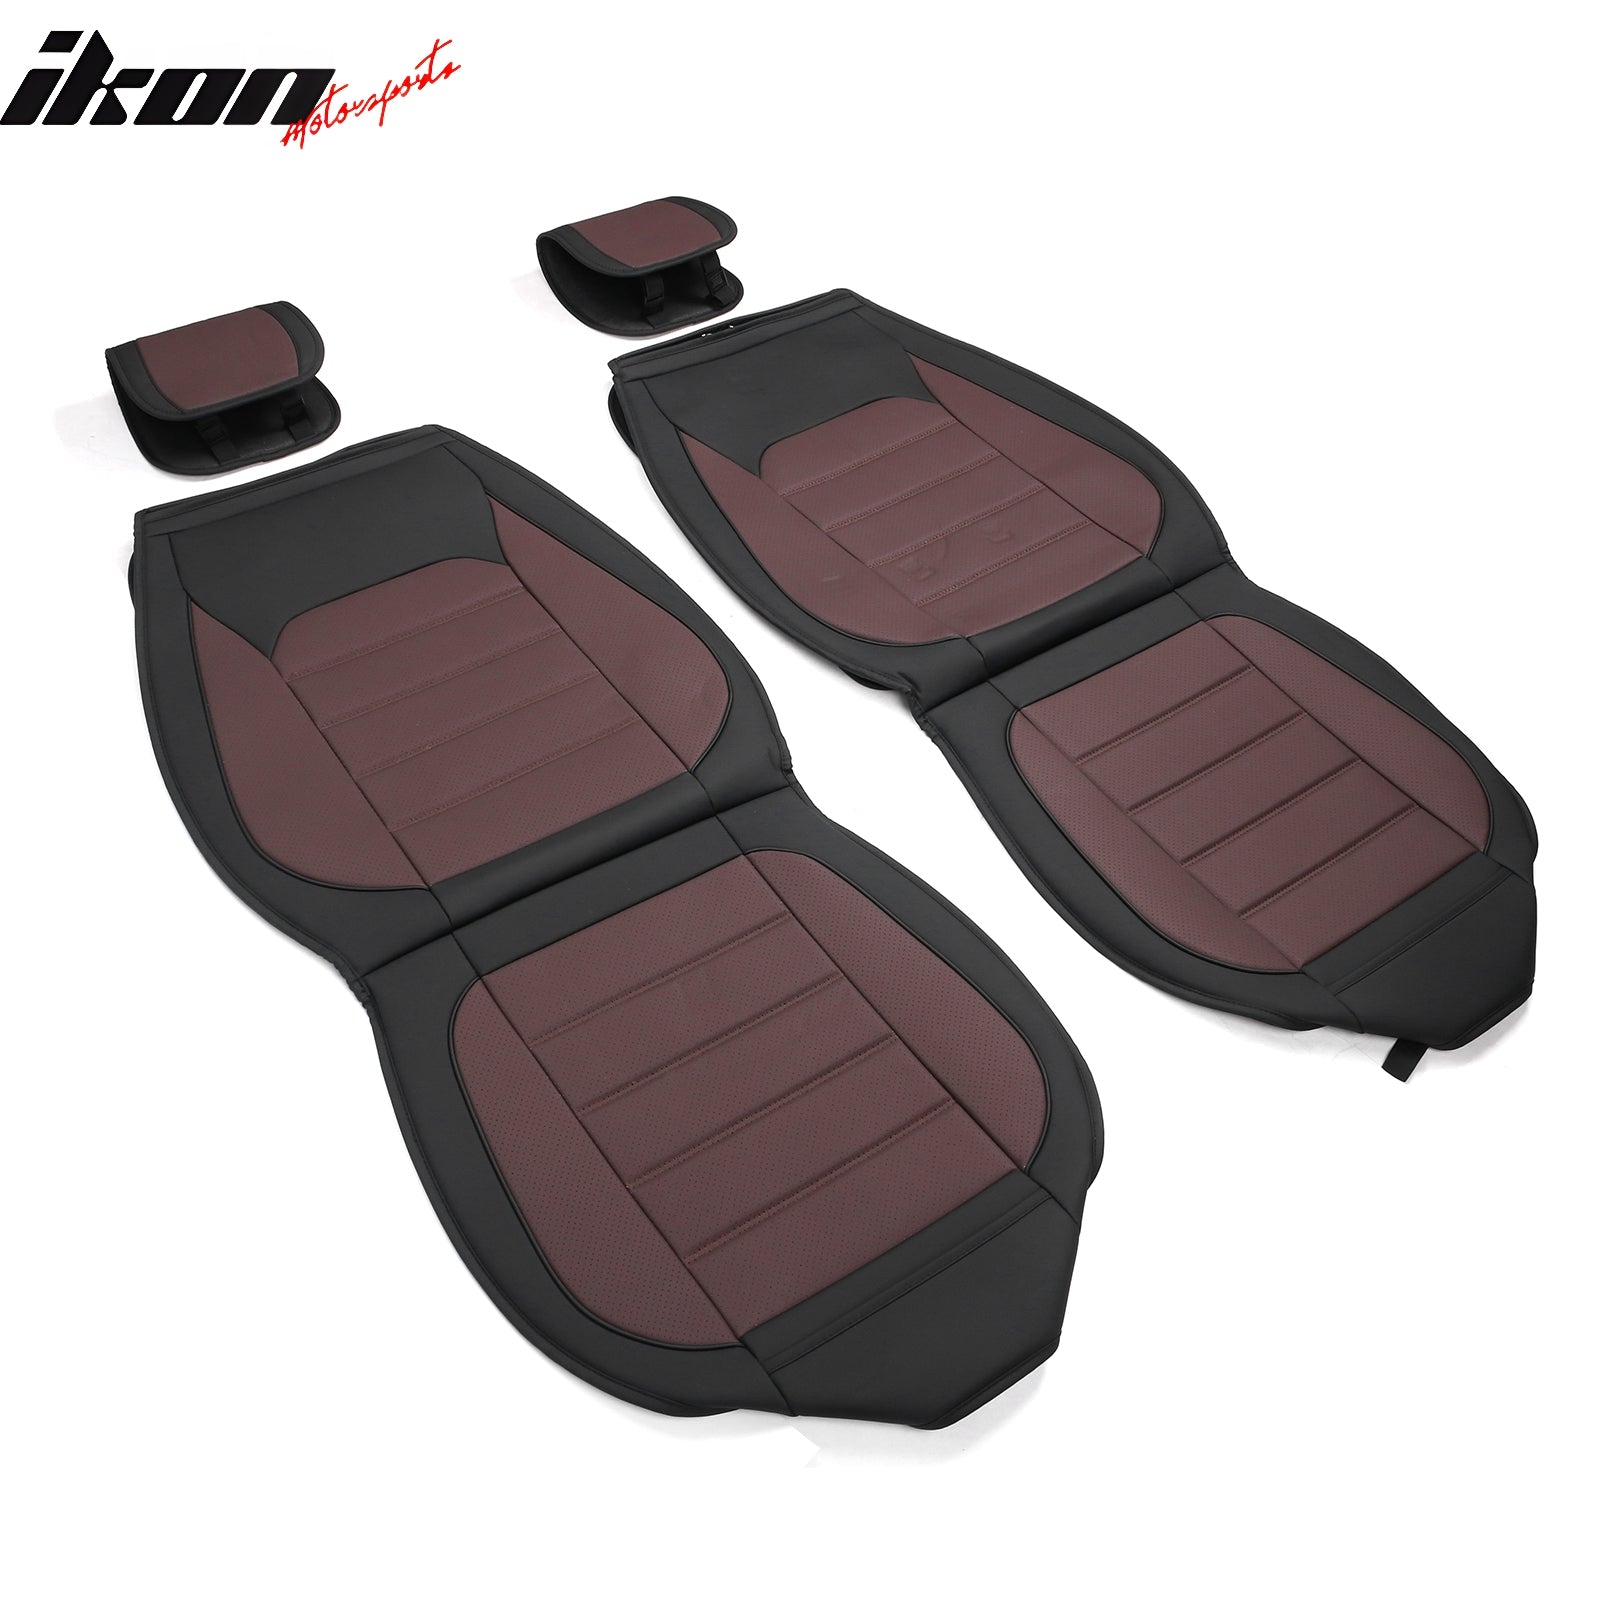 For 09-23 Ford F150 Crew Cab Pickup Seat Covers PU Leather 5 Seats - Black&Brown